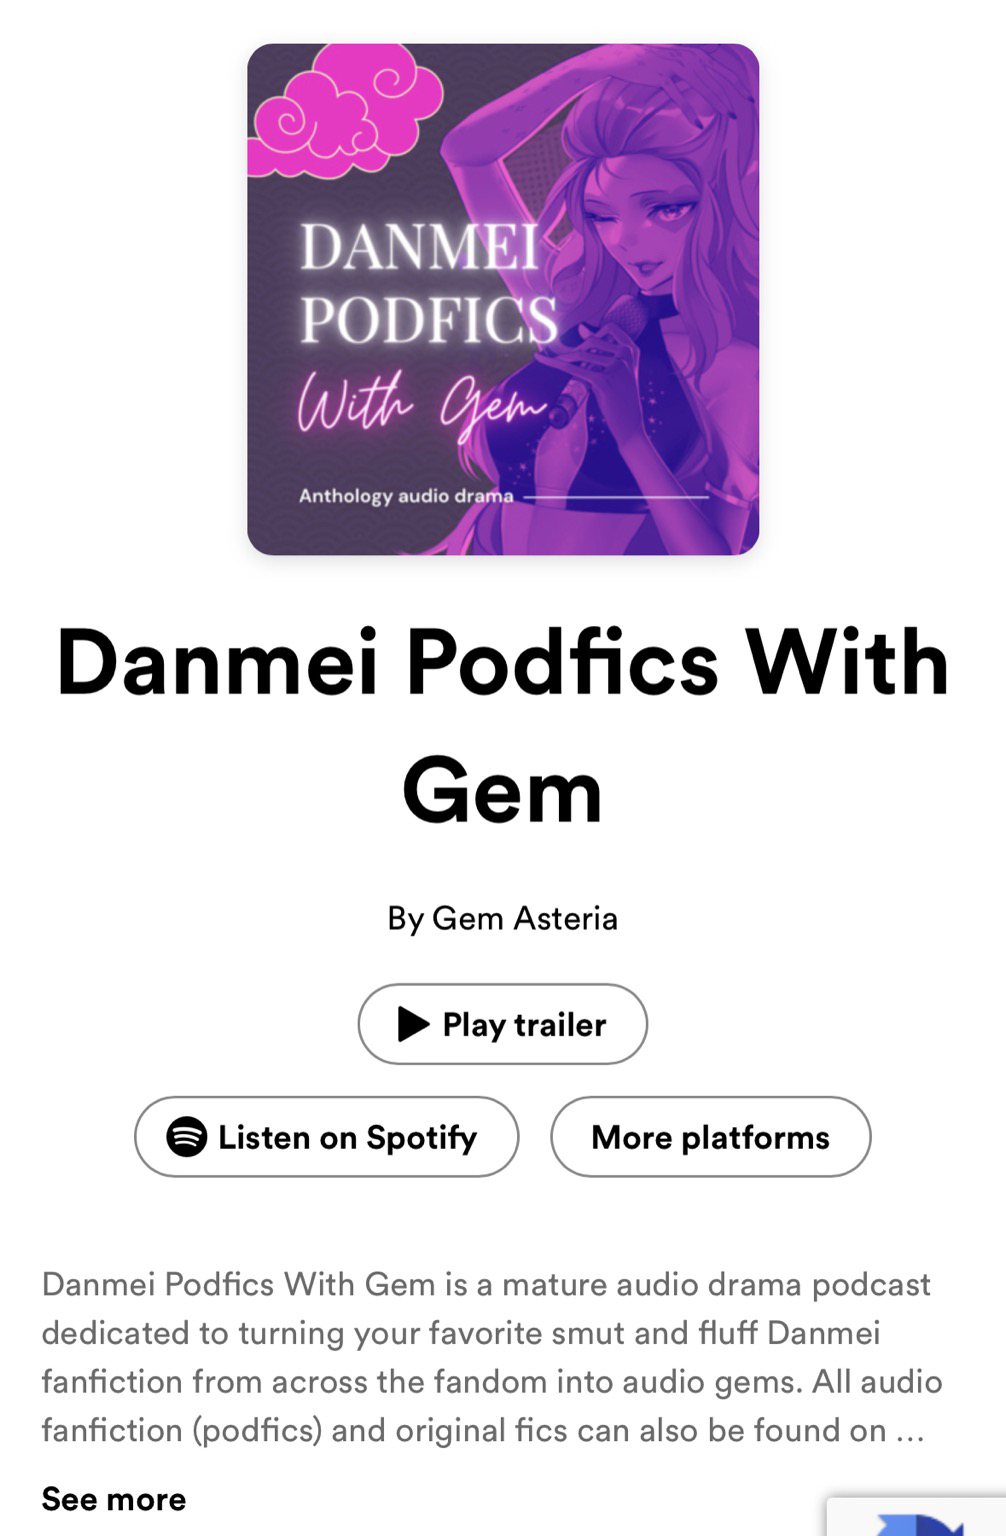 Danmei Podfics With Gem • A podcast on Spotify for Podcasters